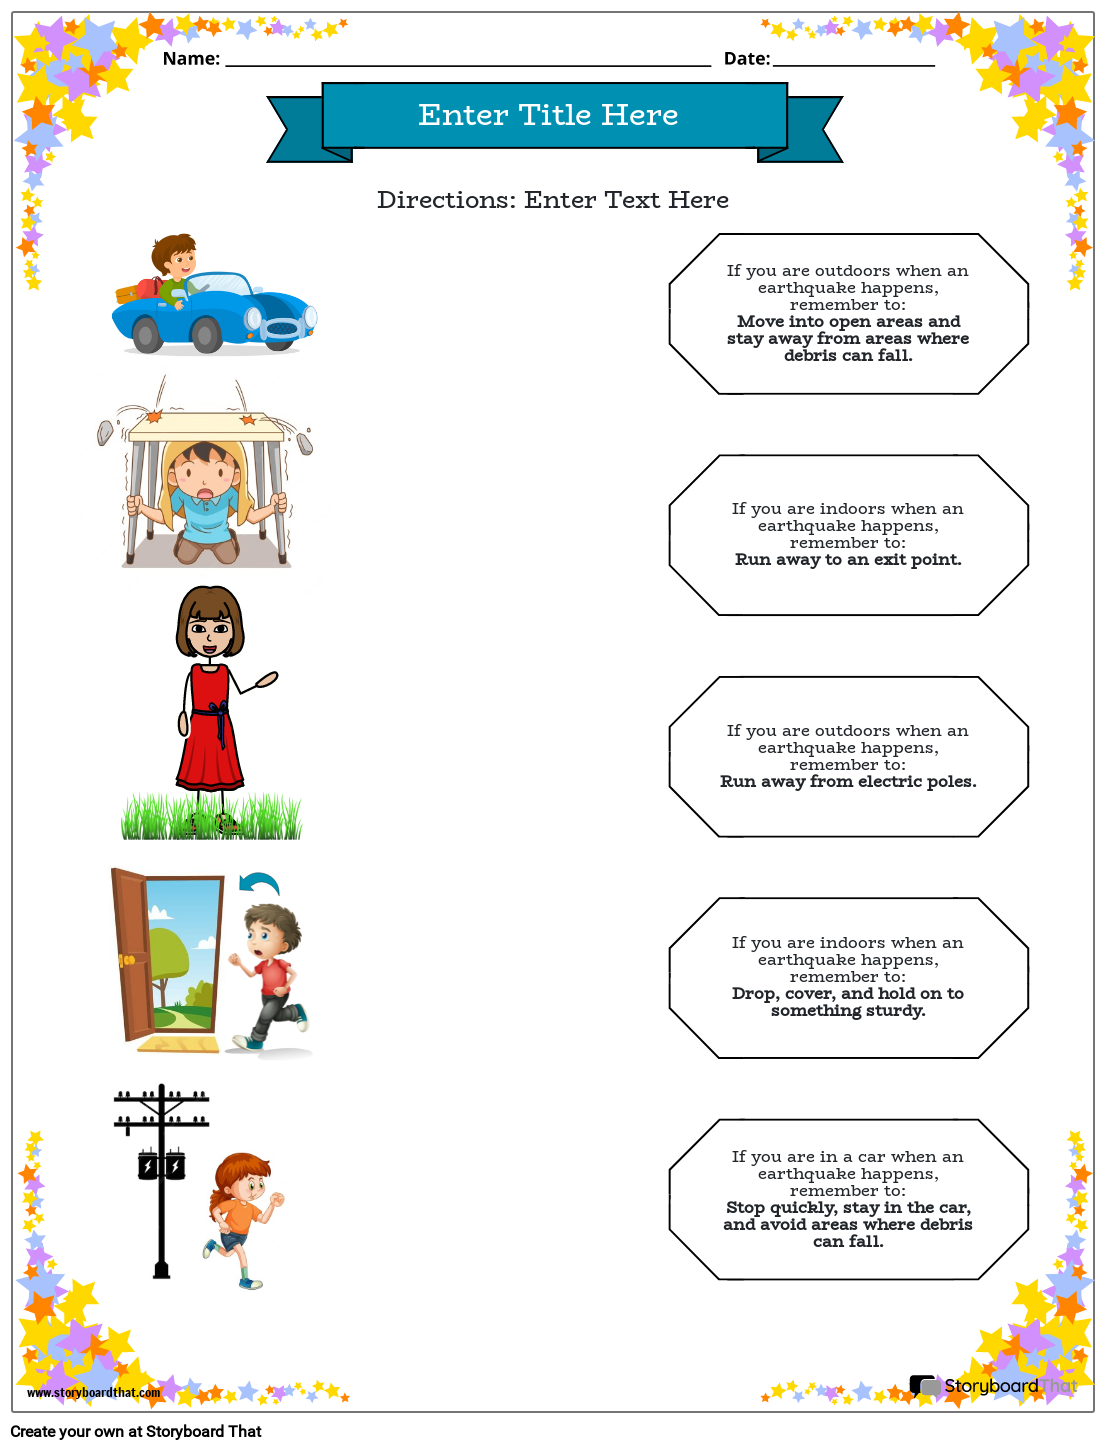 Indoor and outdoor precautions earthquake worksheet with star border